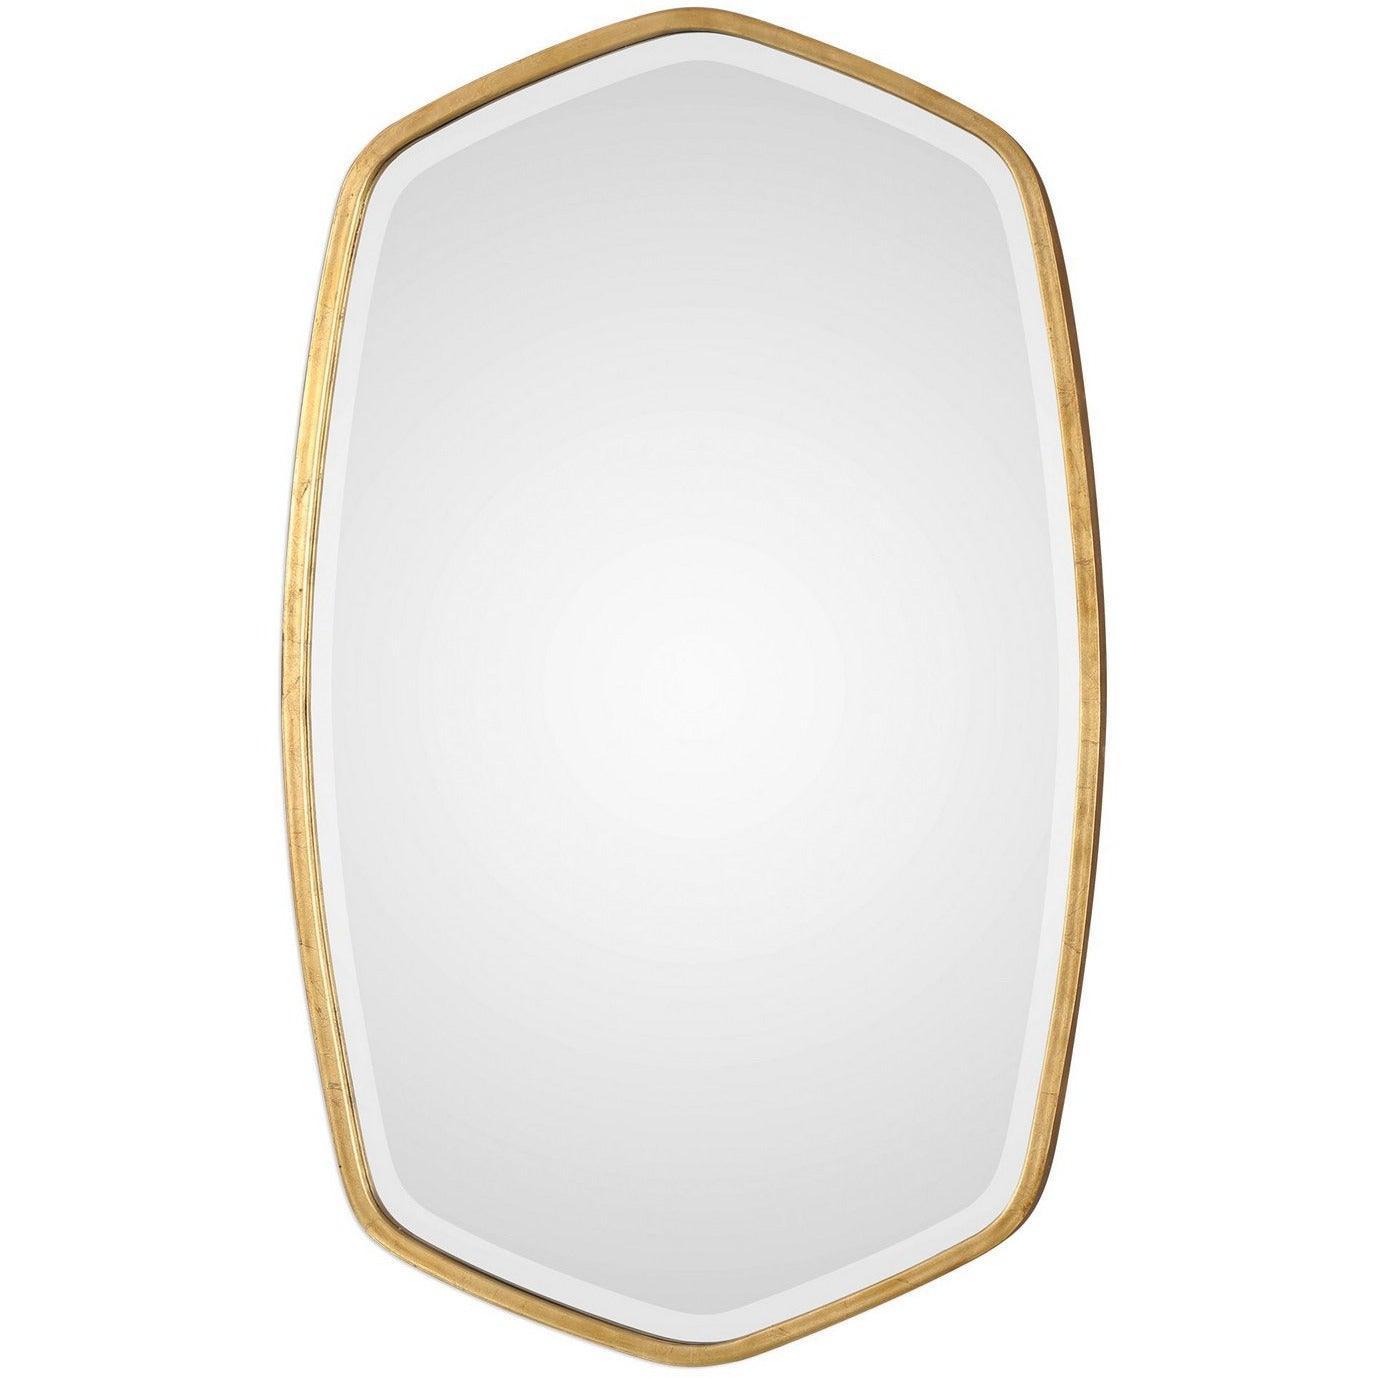 The Uttermost - Duronia Mirror - 09382 | Montreal Lighting & Hardware